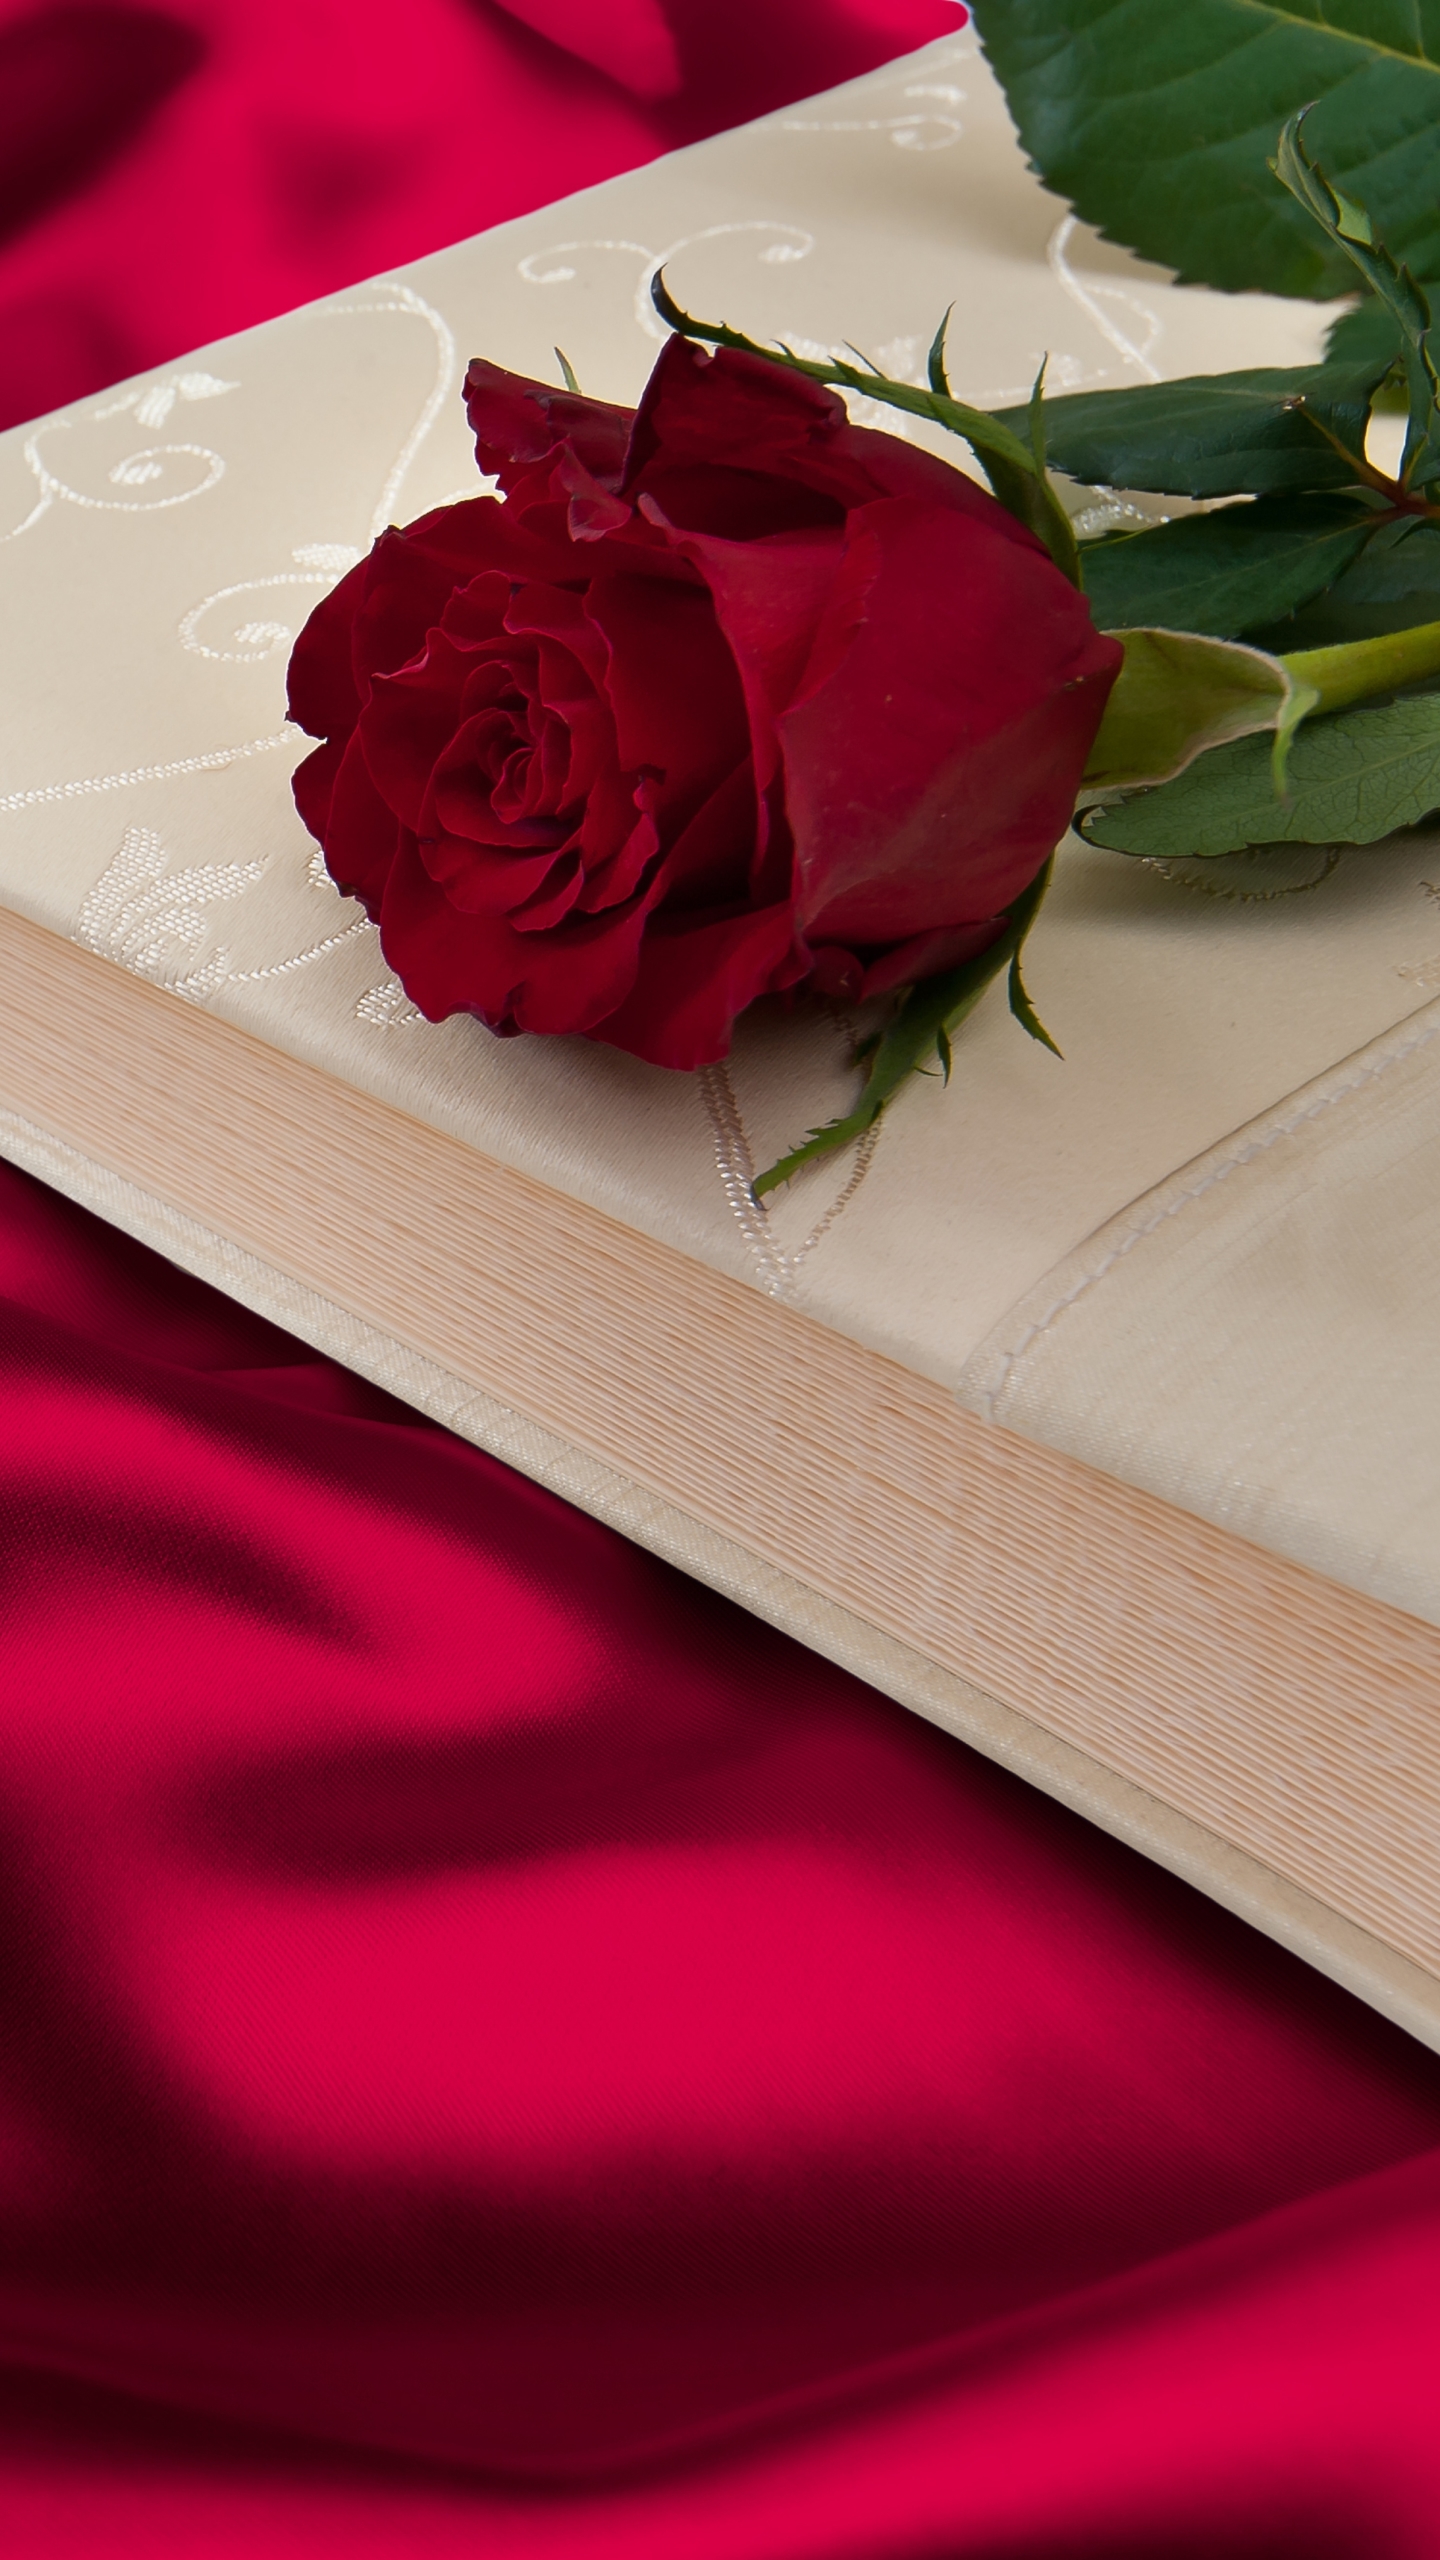 Red Rose and Book on Satin